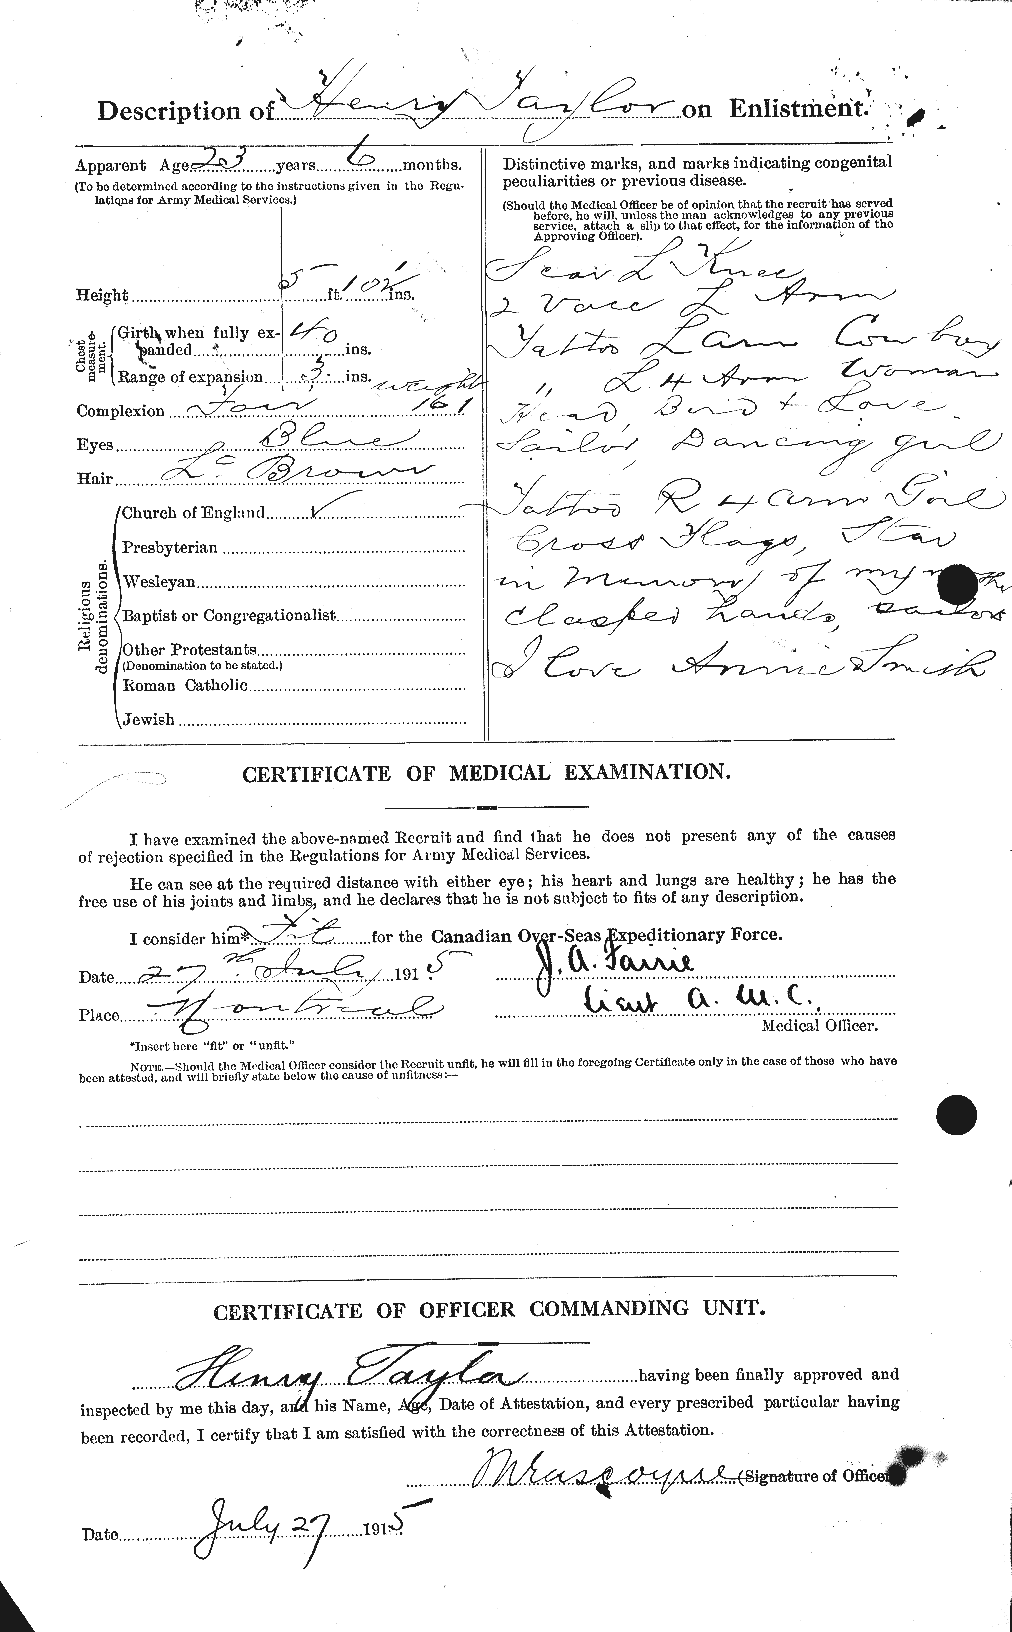 Personnel Records of the First World War - CEF 626519b